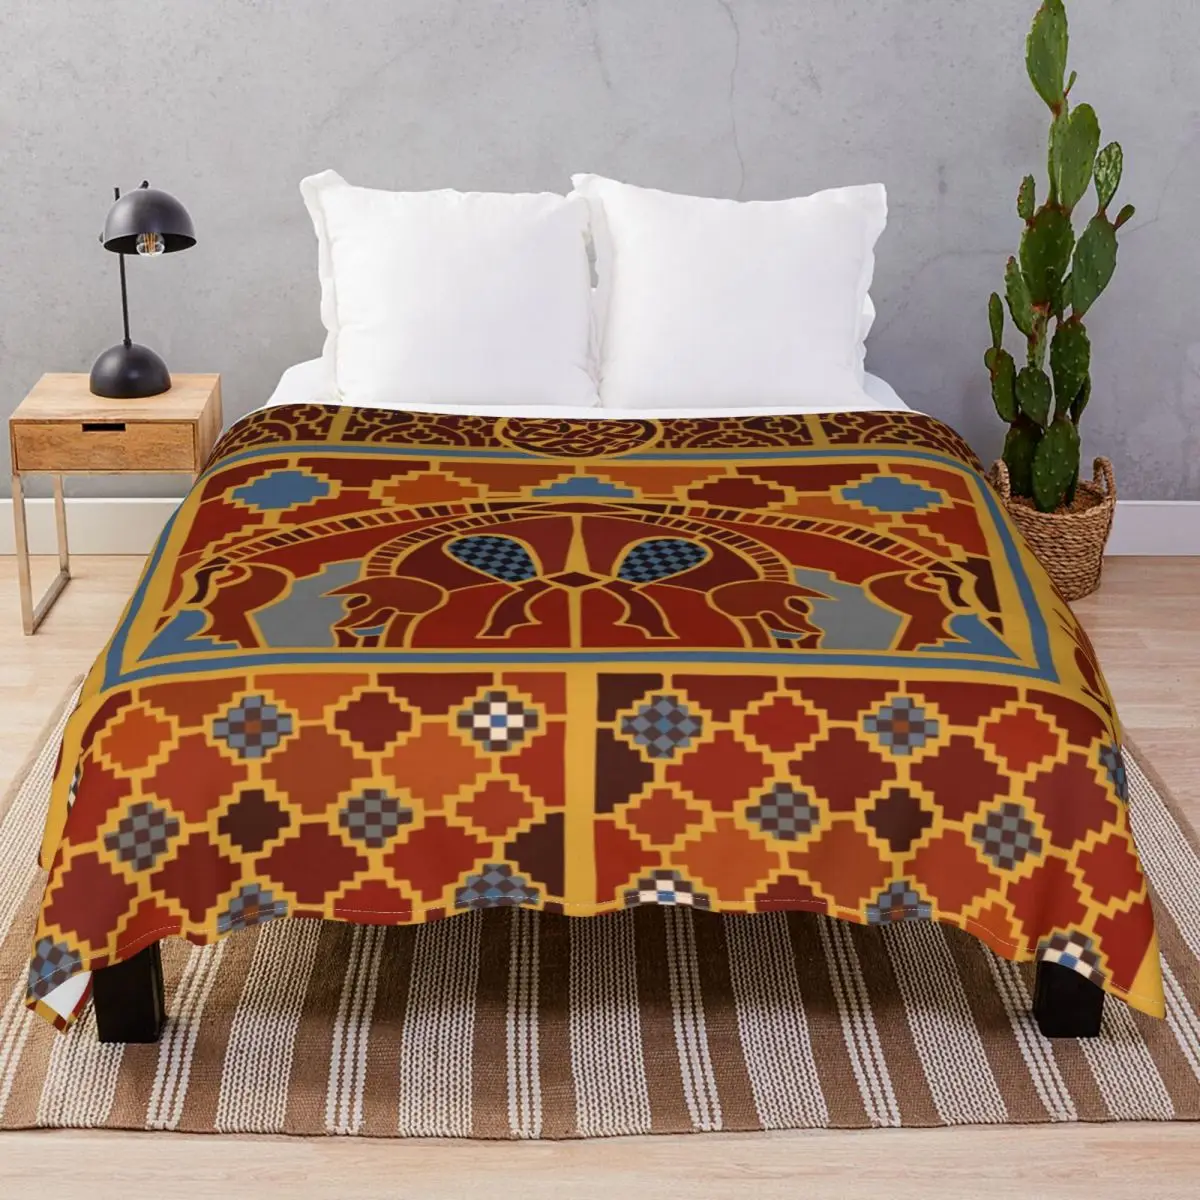 Imagining Sutton Hoo The Boars Blanket Fleece Textile Decor Breathable Throw Blankets for Bedding Home Couch Camp Office